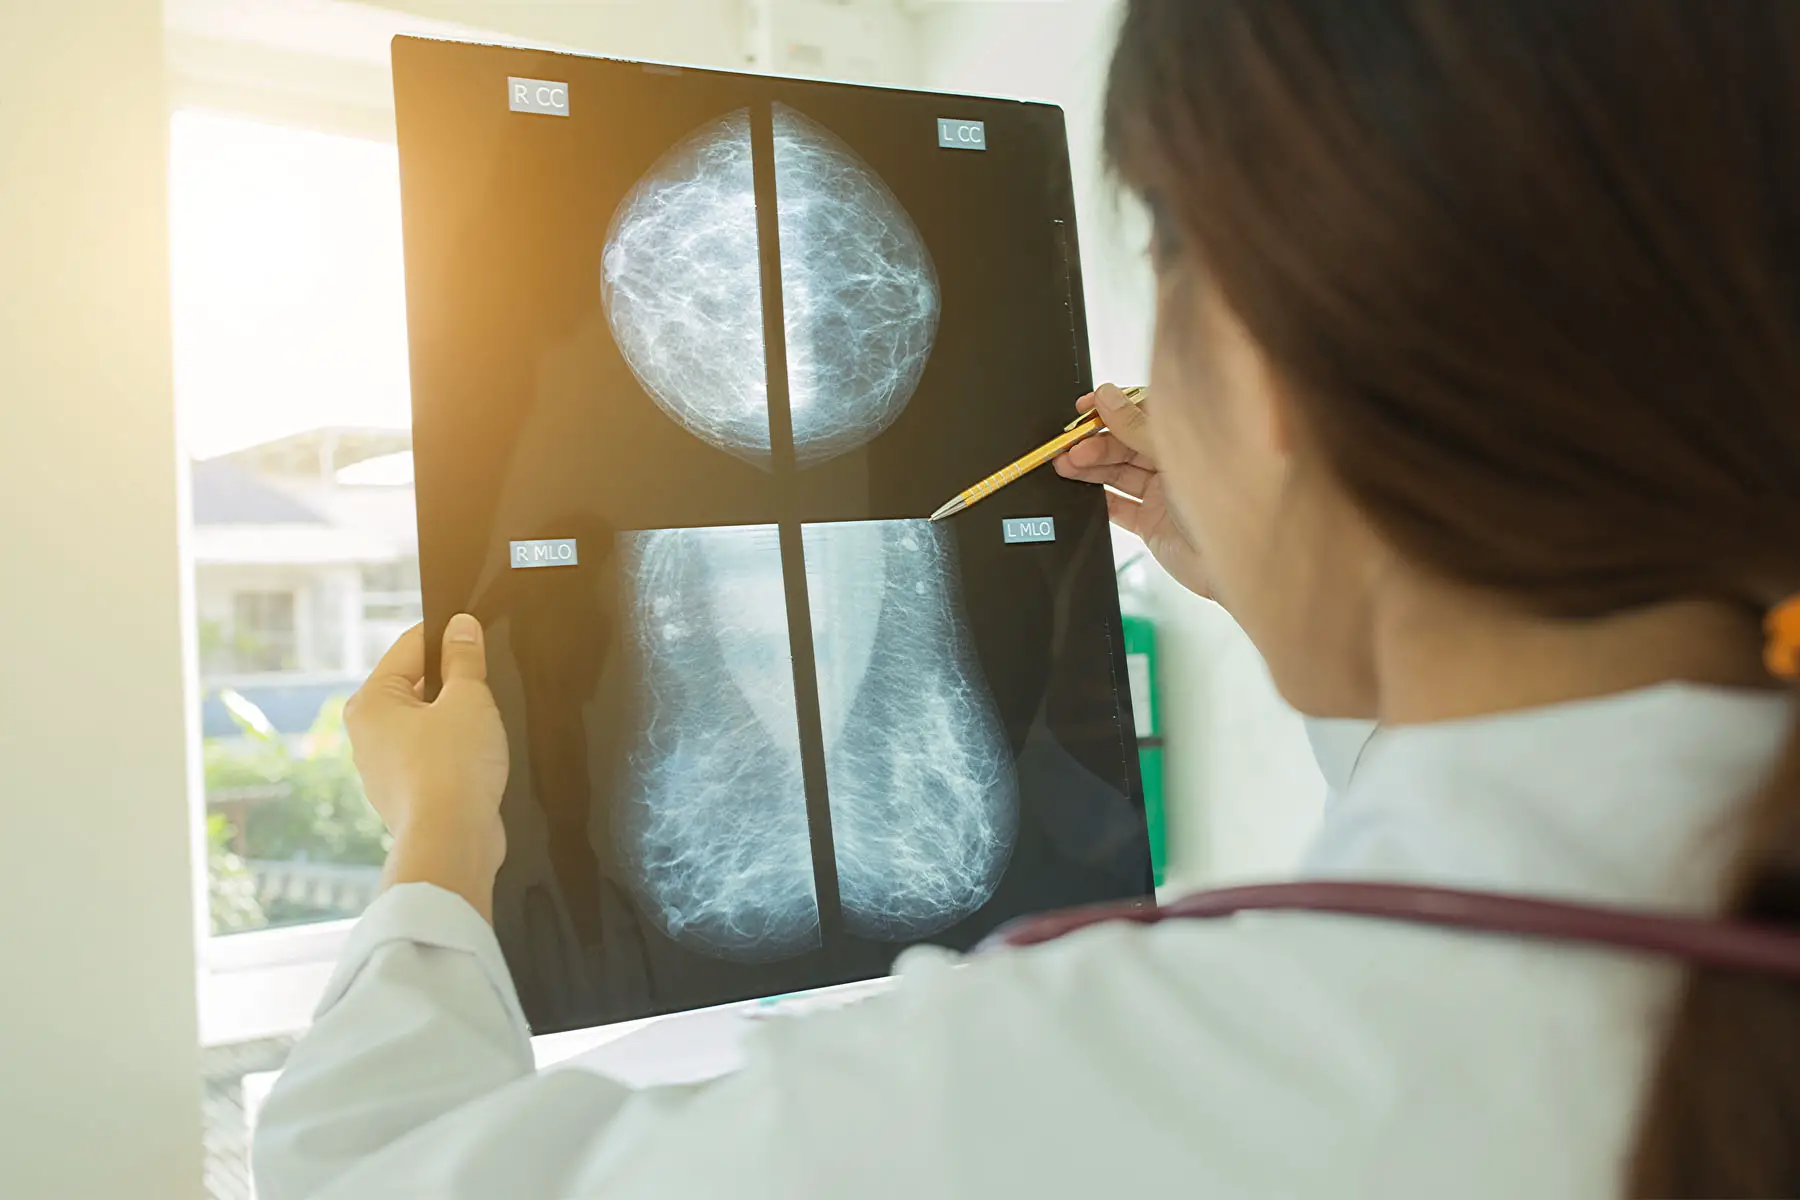 Luxembourg women's healthcare: a doctor examines a mammogram